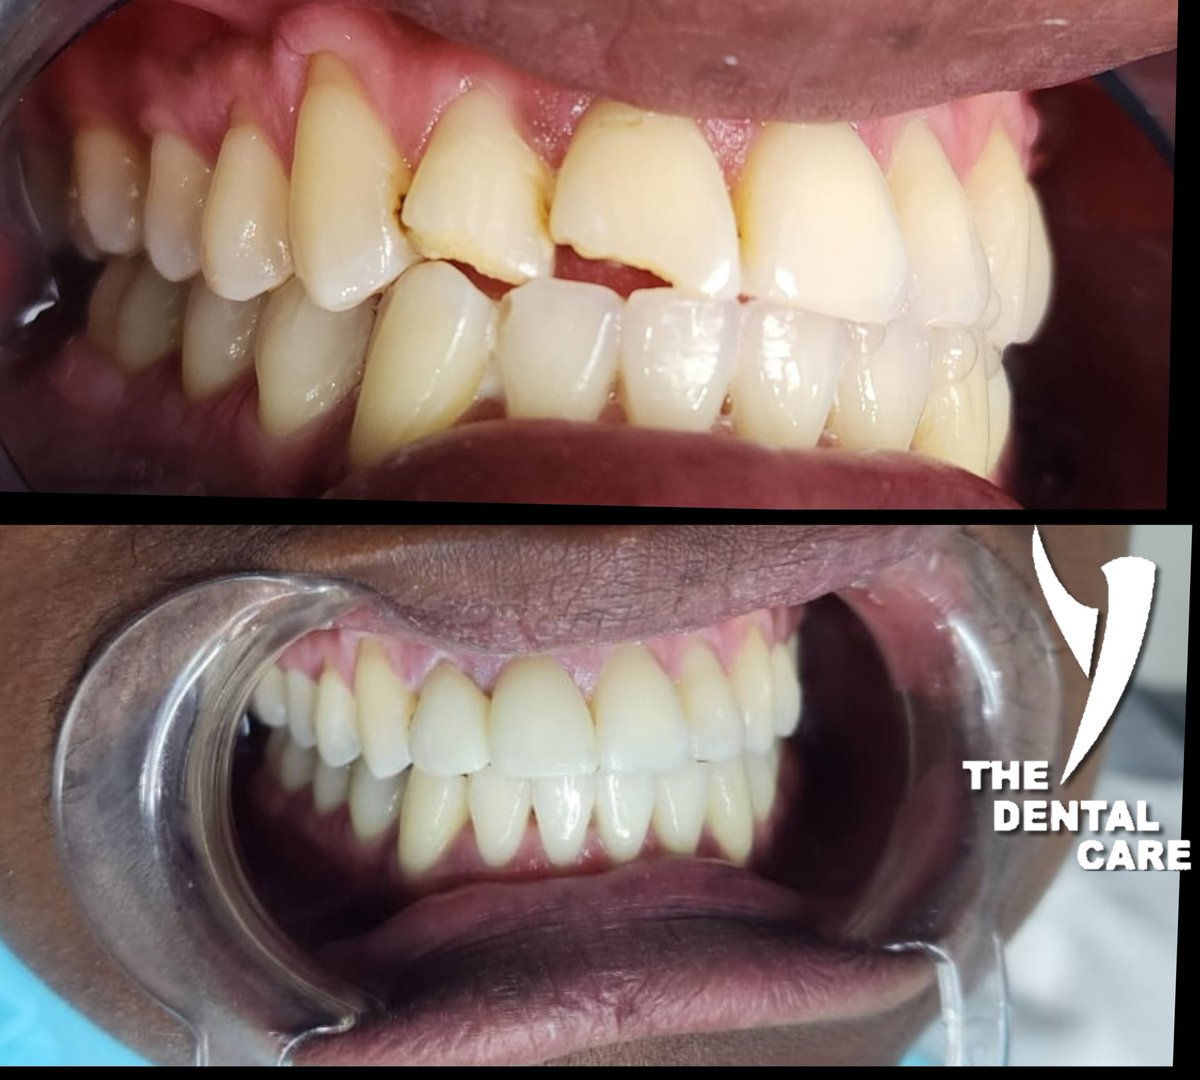 We specialize in restoring broken teeth, helping you regain your smile and confidence. Say goodbye to dental issues and hello to a brighter, healthier smile! #DentalCare #SmileRestoration'
Library Gardens ,Polokwane 015 280 0142 Whatsapp 063 588 8906